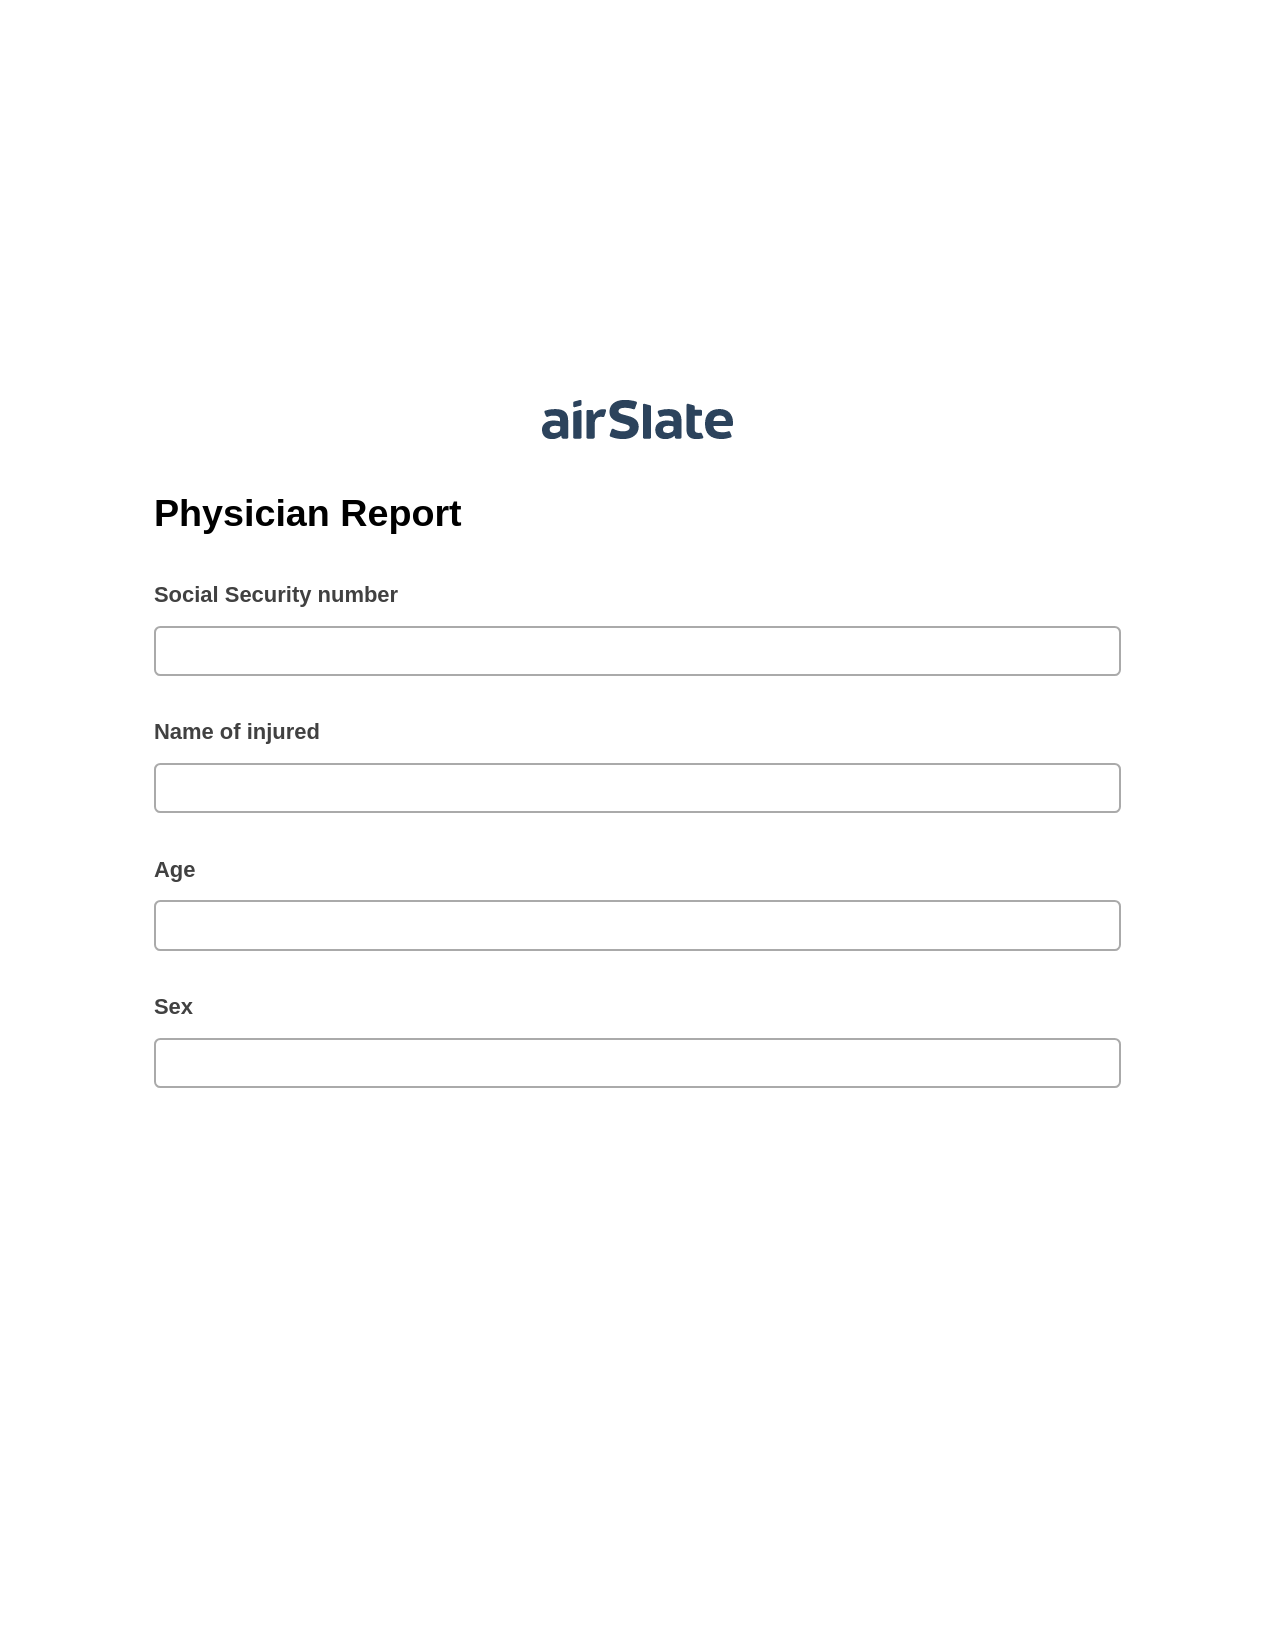 Physician Report Pre-fill from CSV File Bot, Remove Slate Bot, Archive to SharePoint Folder Bot